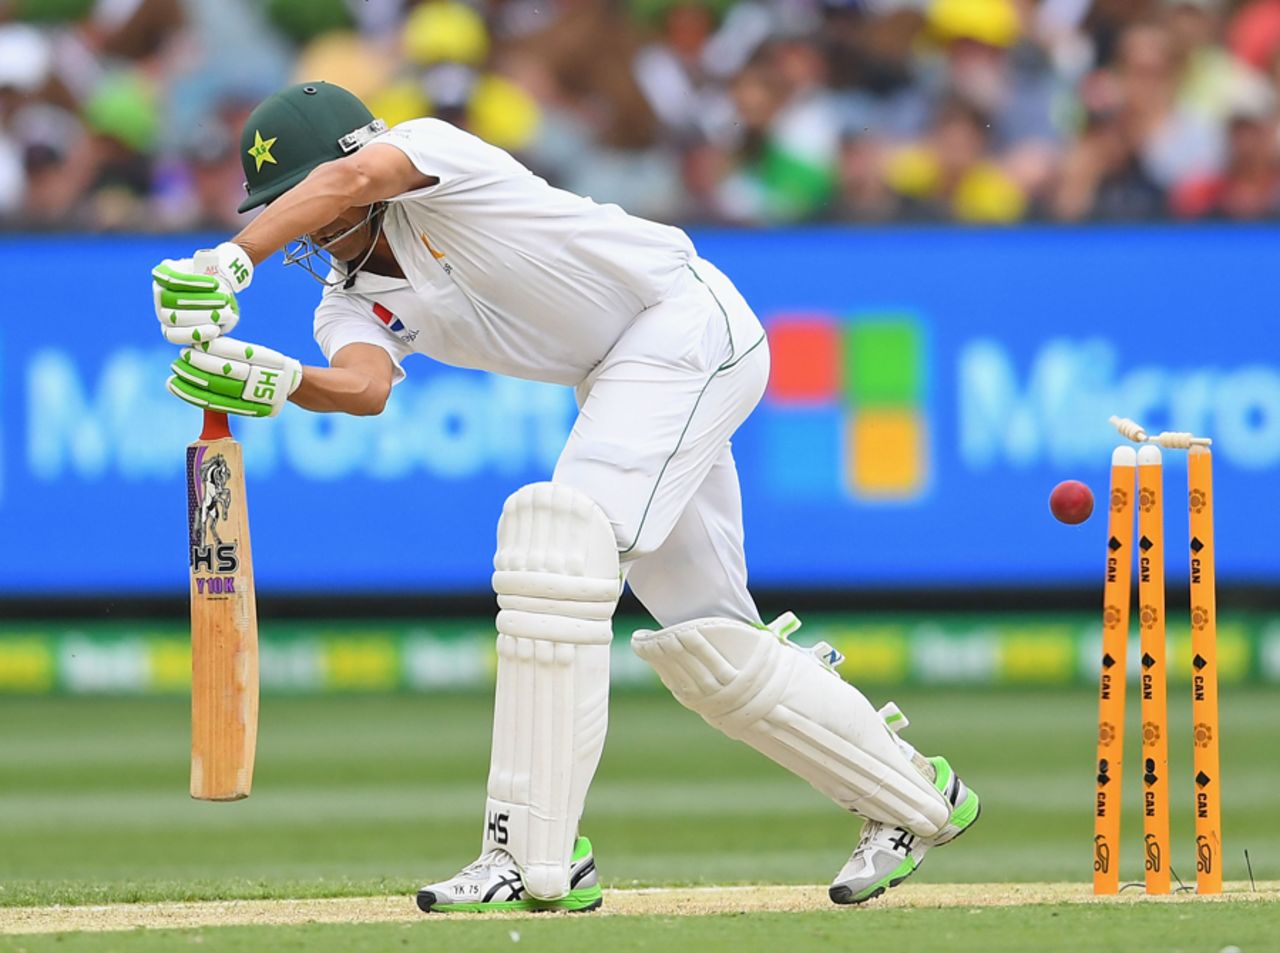 The ball sneaks through the gap and takes Younis Khan's off stump, Australia v Pakistan, 2nd Test, 1st day, Melbourne, December 26, 2016